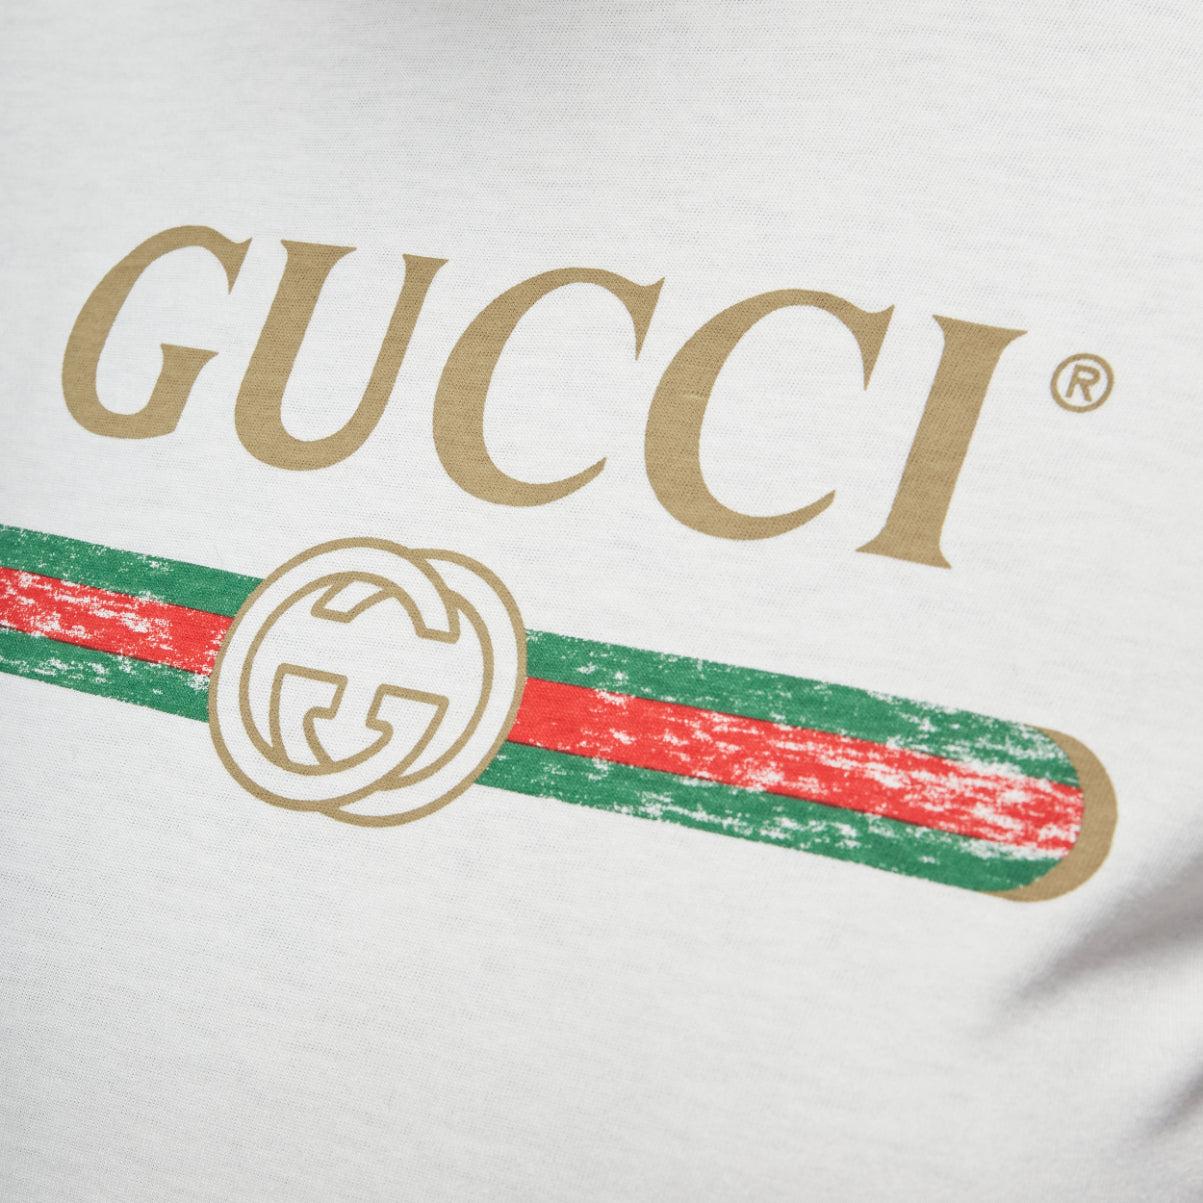 GUCCI Kids washed vintage logo web print short sleeve baby tshirt 10Y XS
Reference: AAWC/A00758
Brand: Gucci
Designer: Alessandro Michele
Collection: Kids
Material: Cotton
Color: Off White
Pattern: Solid
Made in: Italy

CONDITION:
Condition: Very